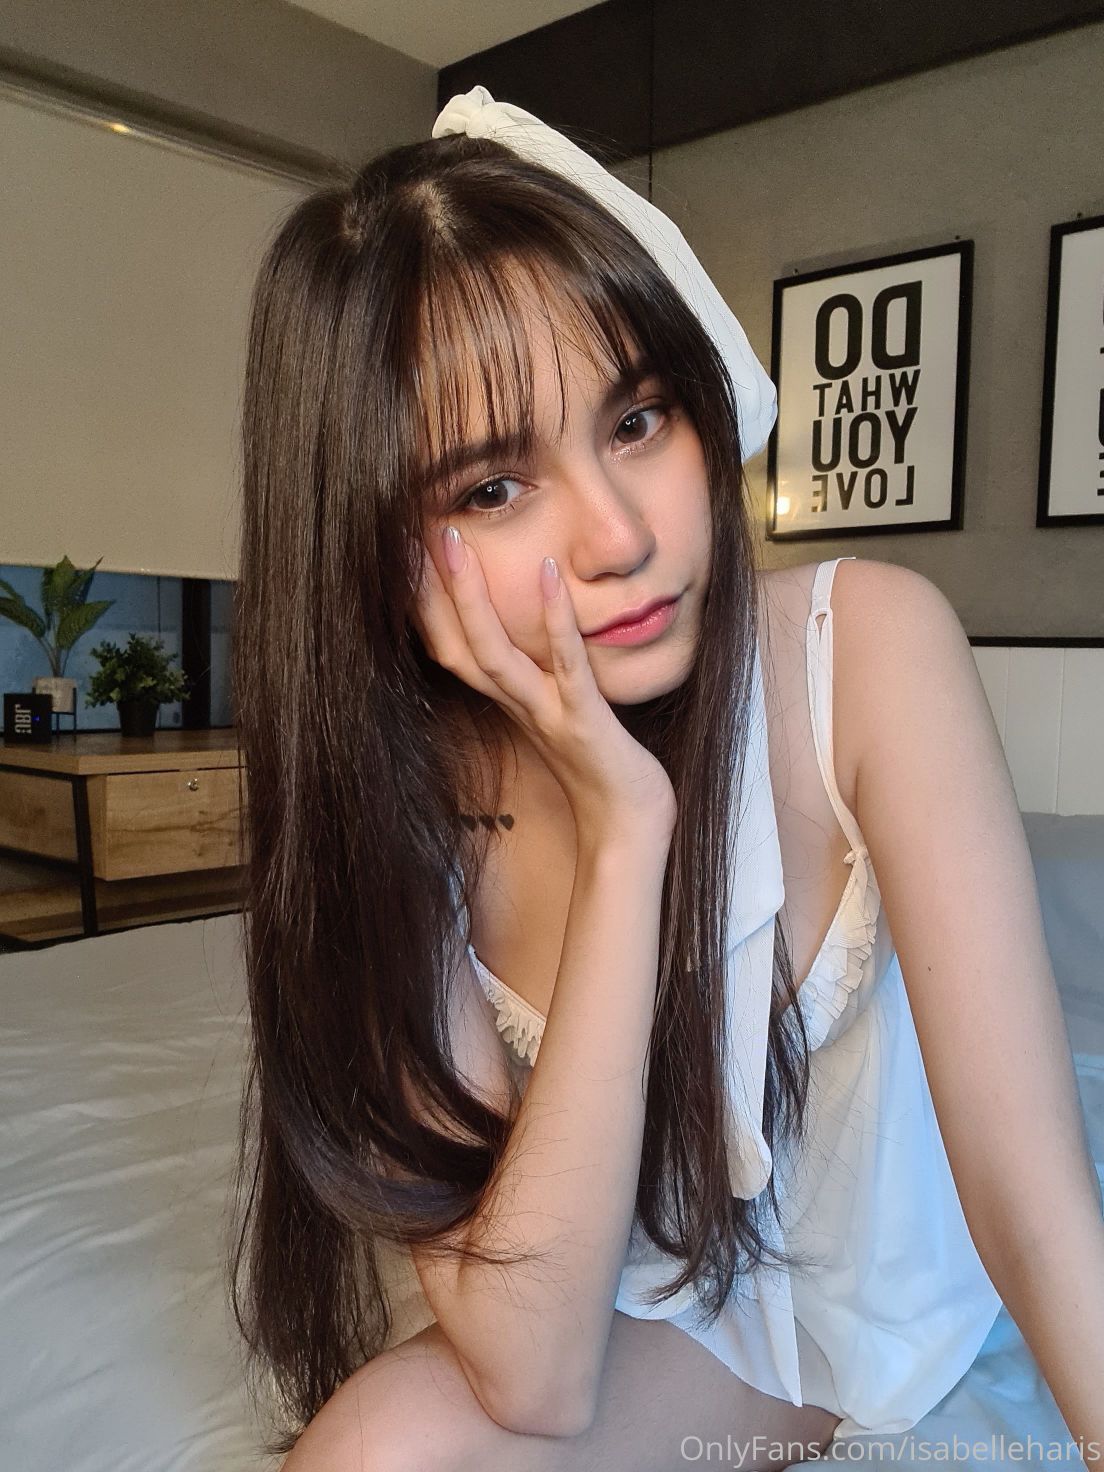 AsianOnlyfans 154 234 20211024